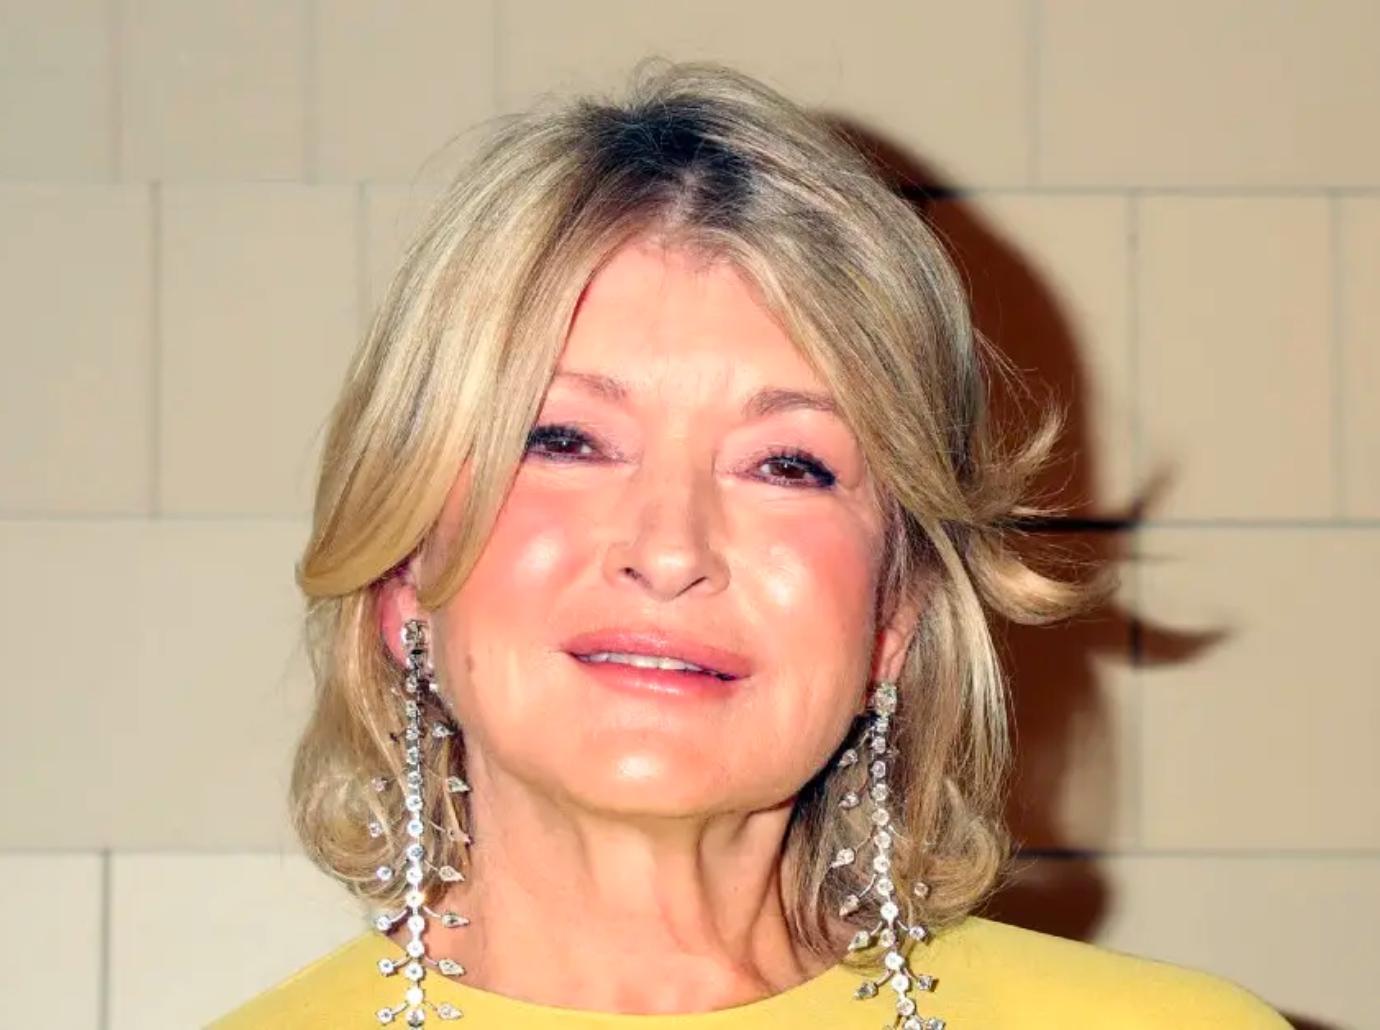 Martha Stewart 'not in the position' to take care of a man